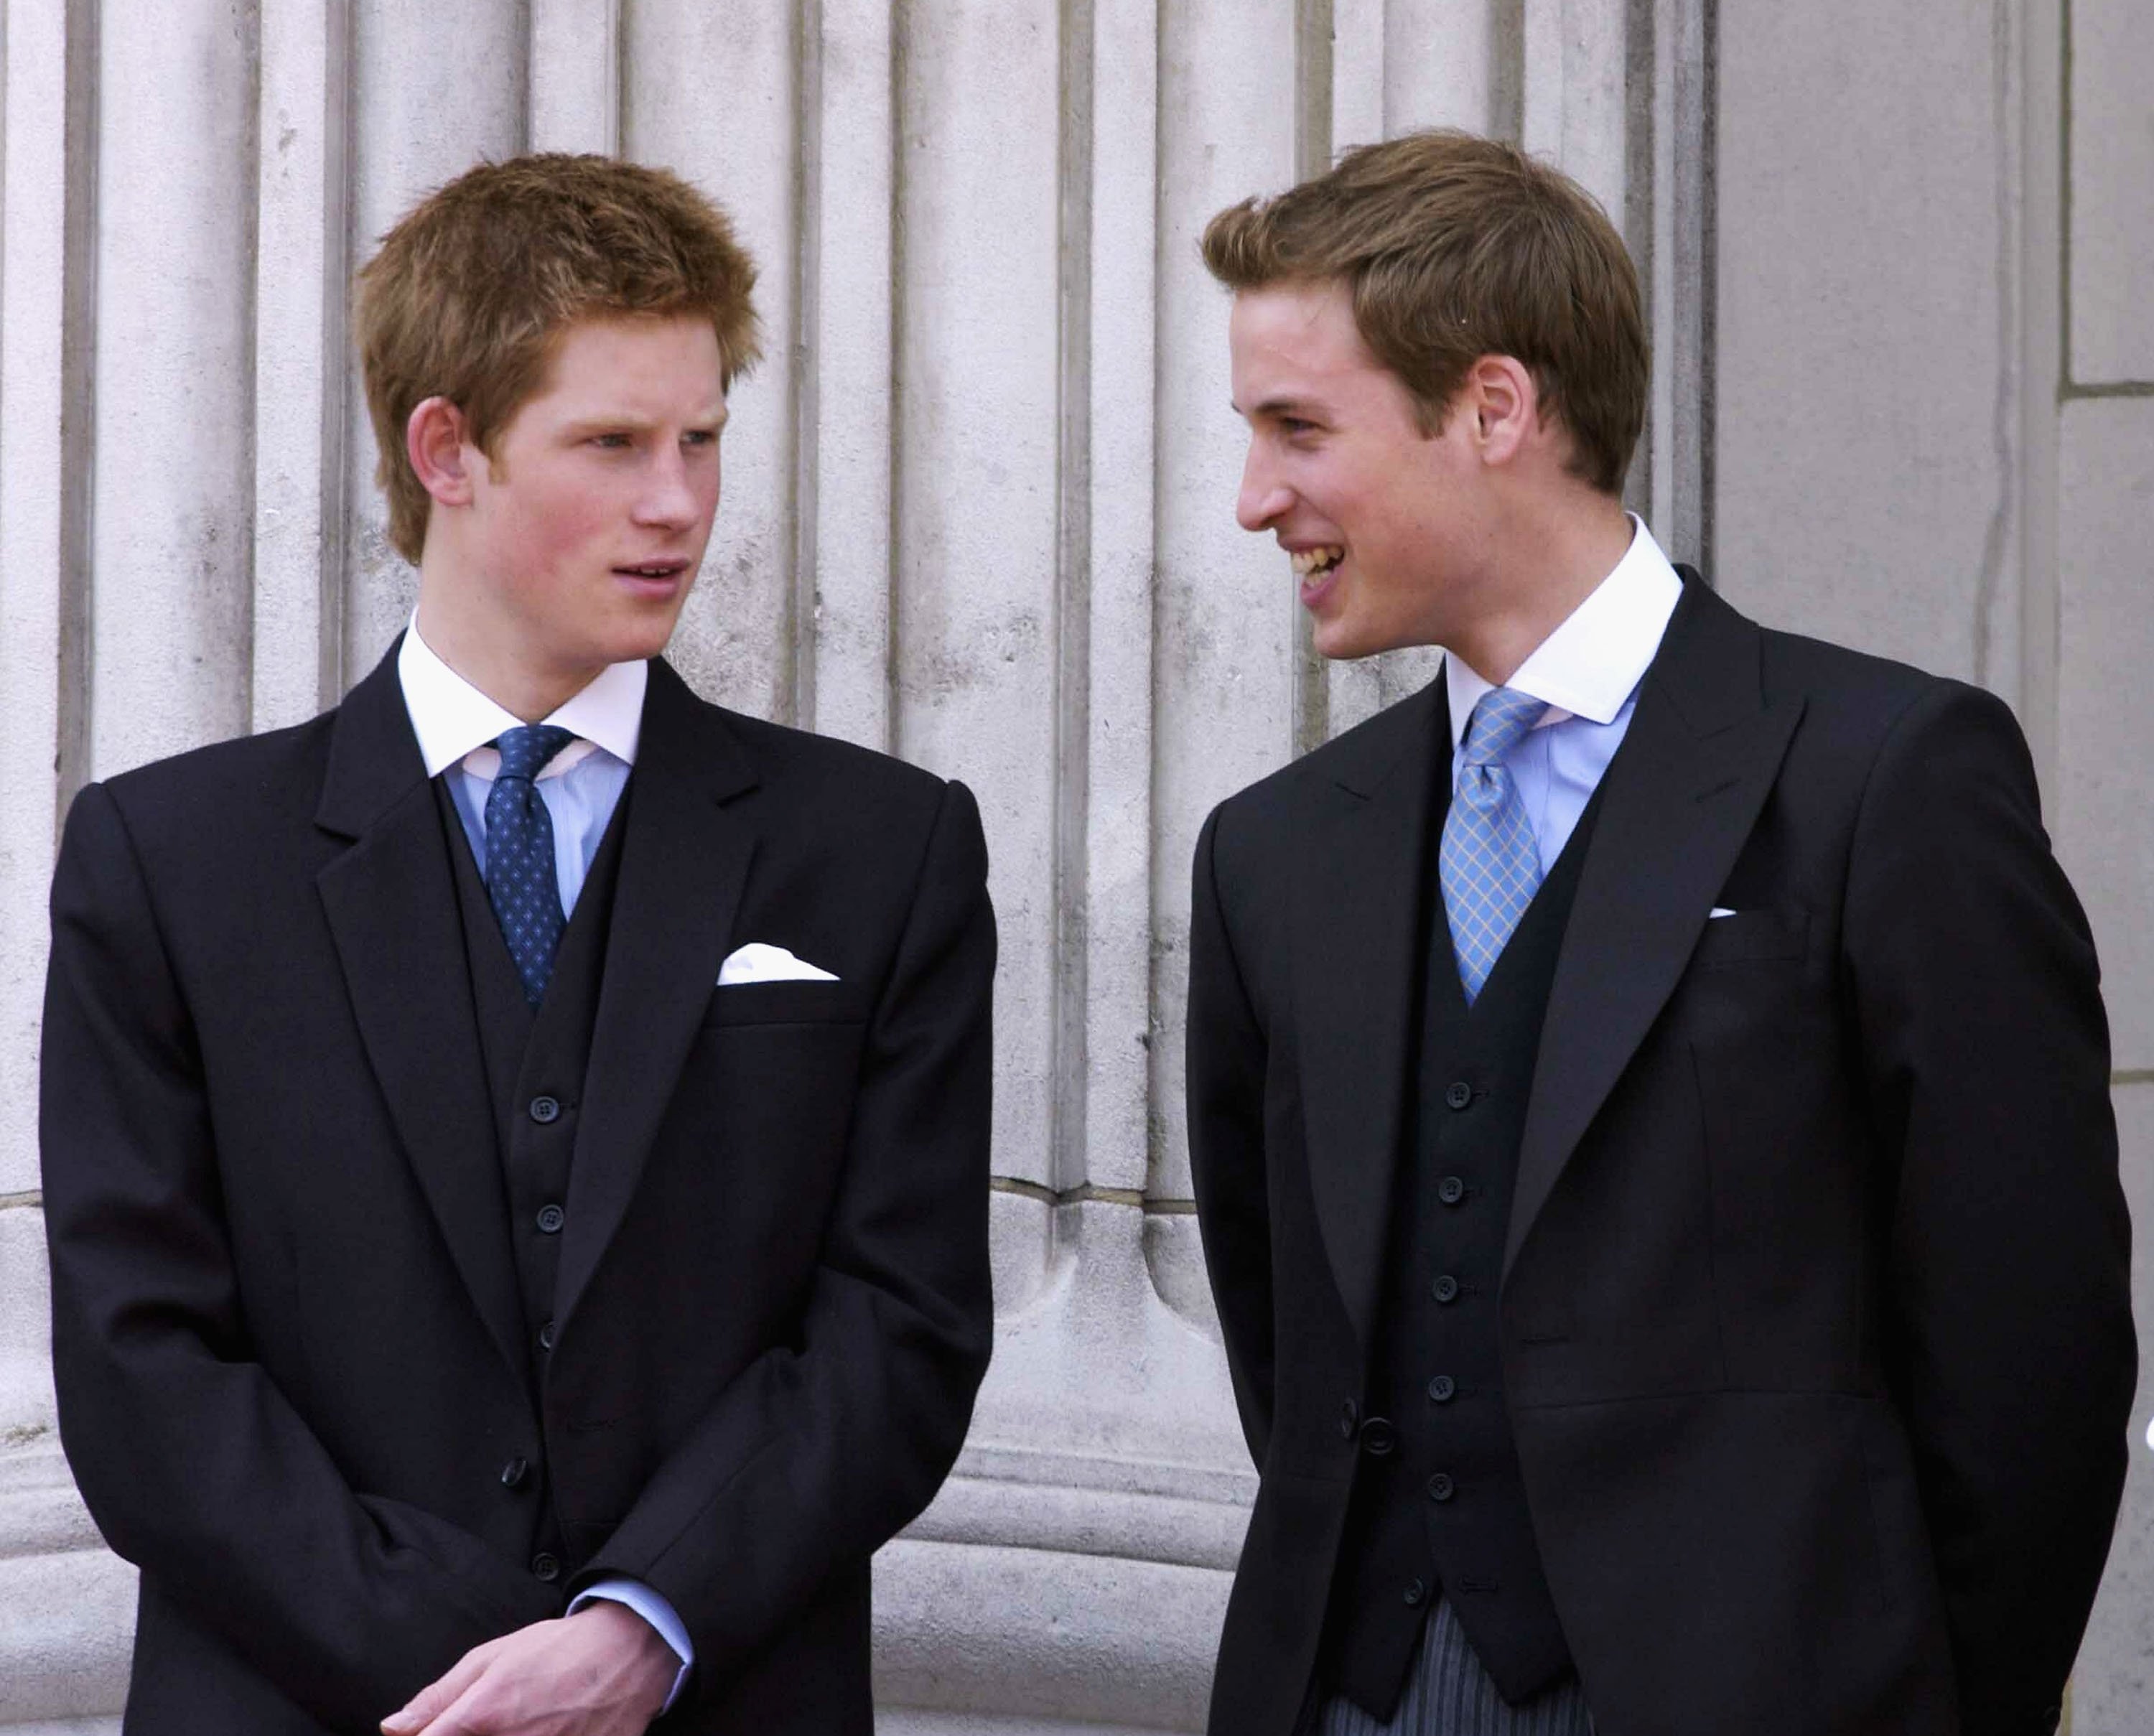 Prince William and Prince Harry on the balcony at Buckingham Palace on June 14, 2003, after Trooping the Colour in London, England. | Source: Getty Images